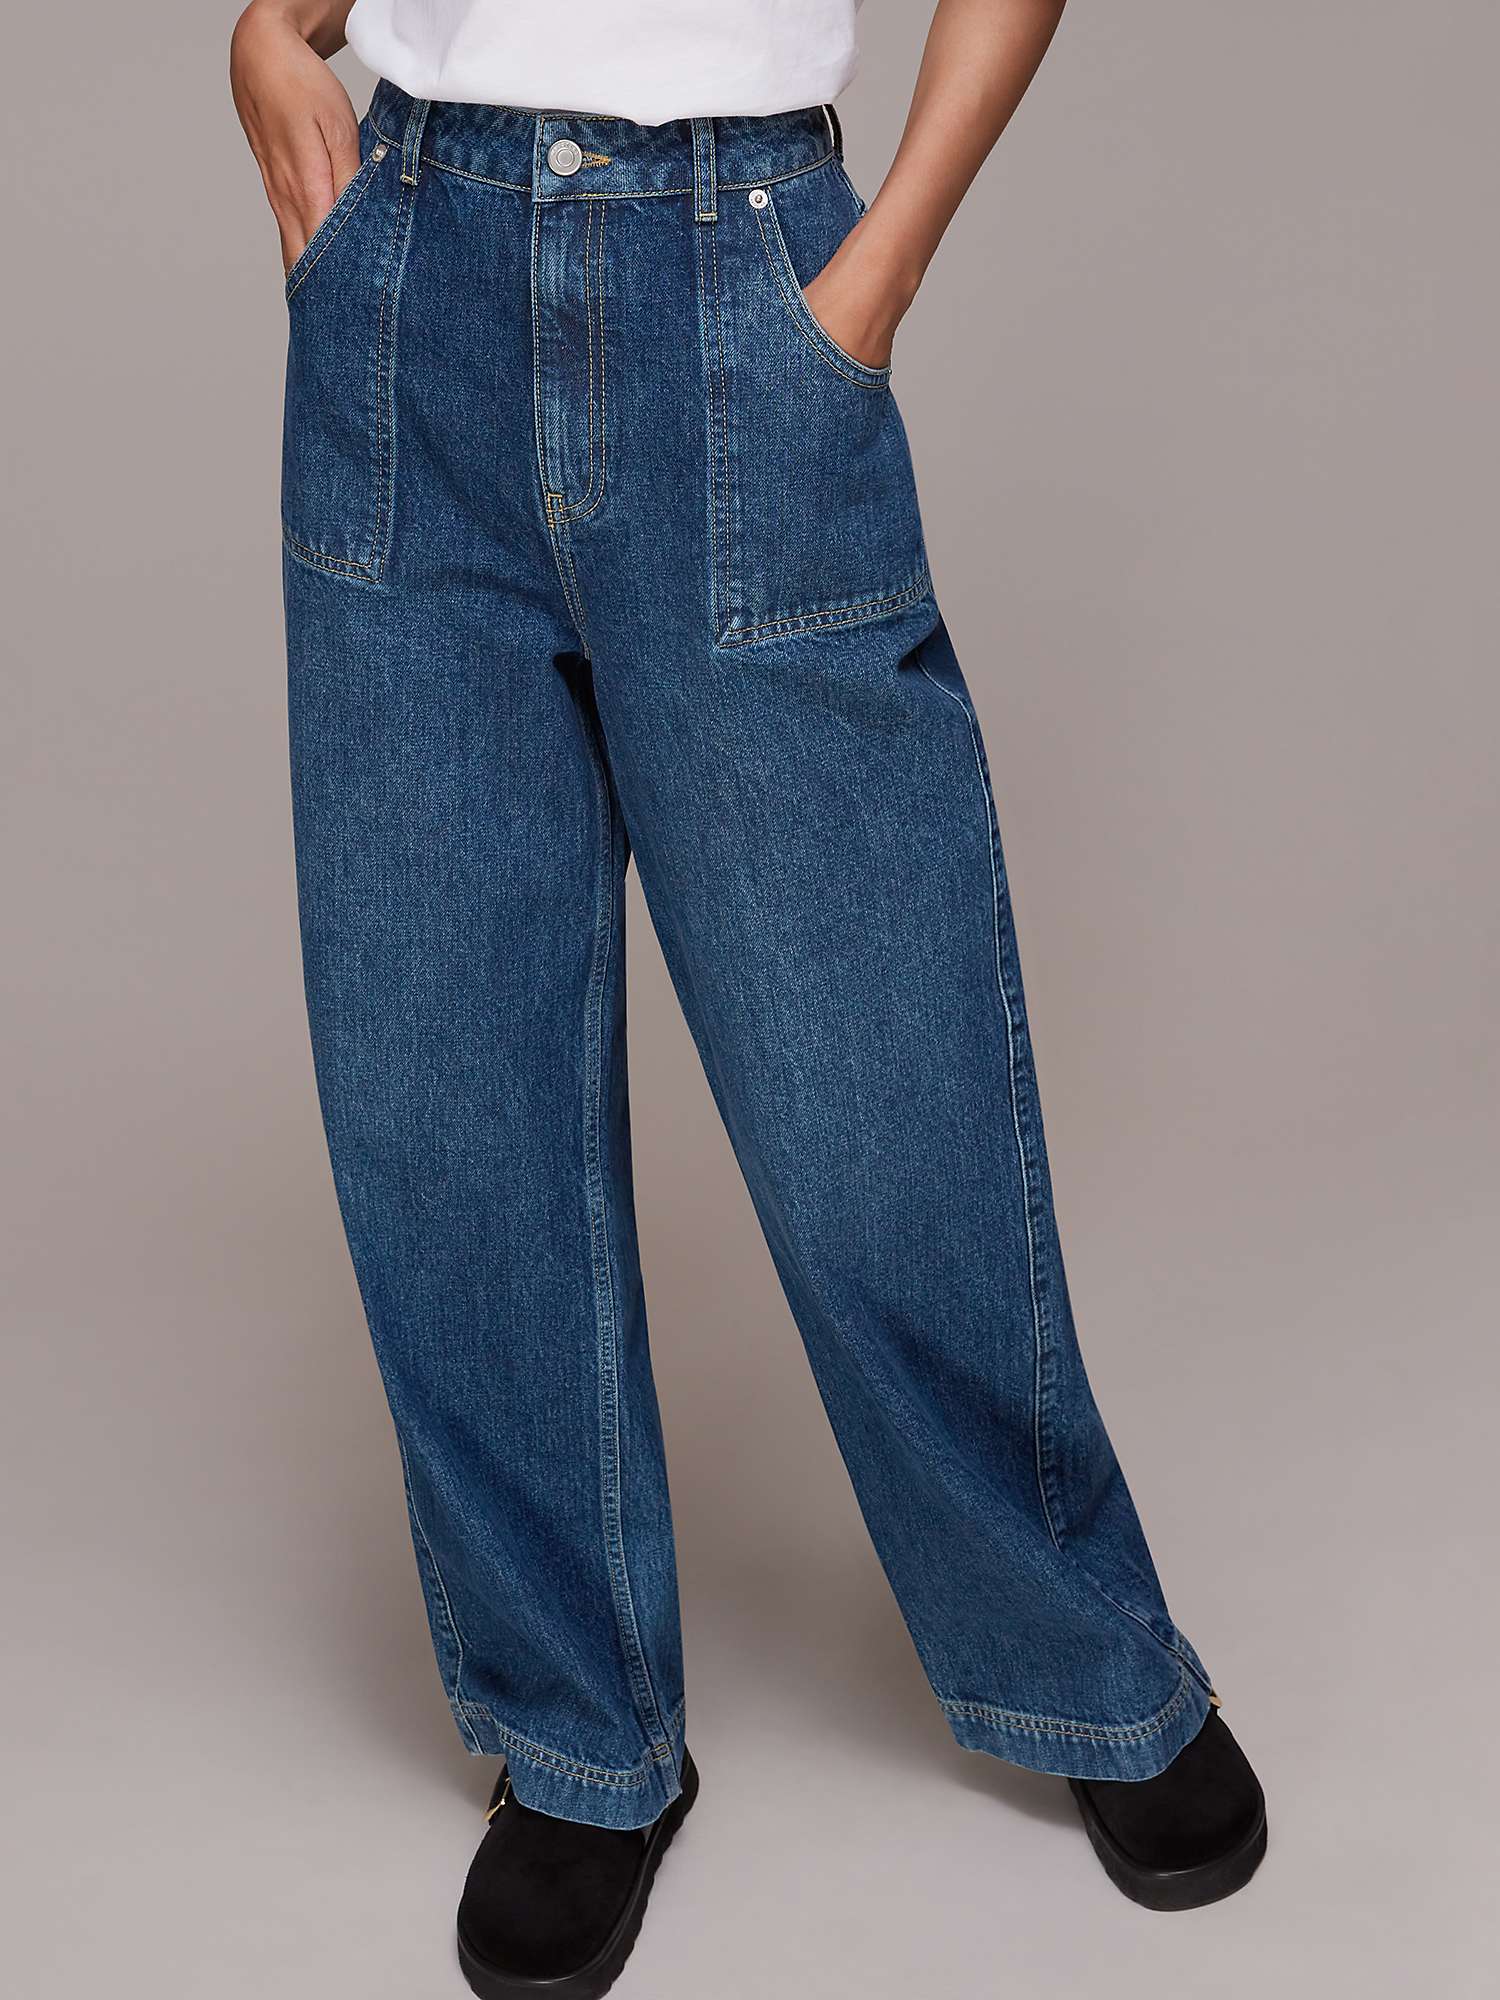 Whistles Petite Authentic Raya Straight Jeans, Blue at John Lewis ...